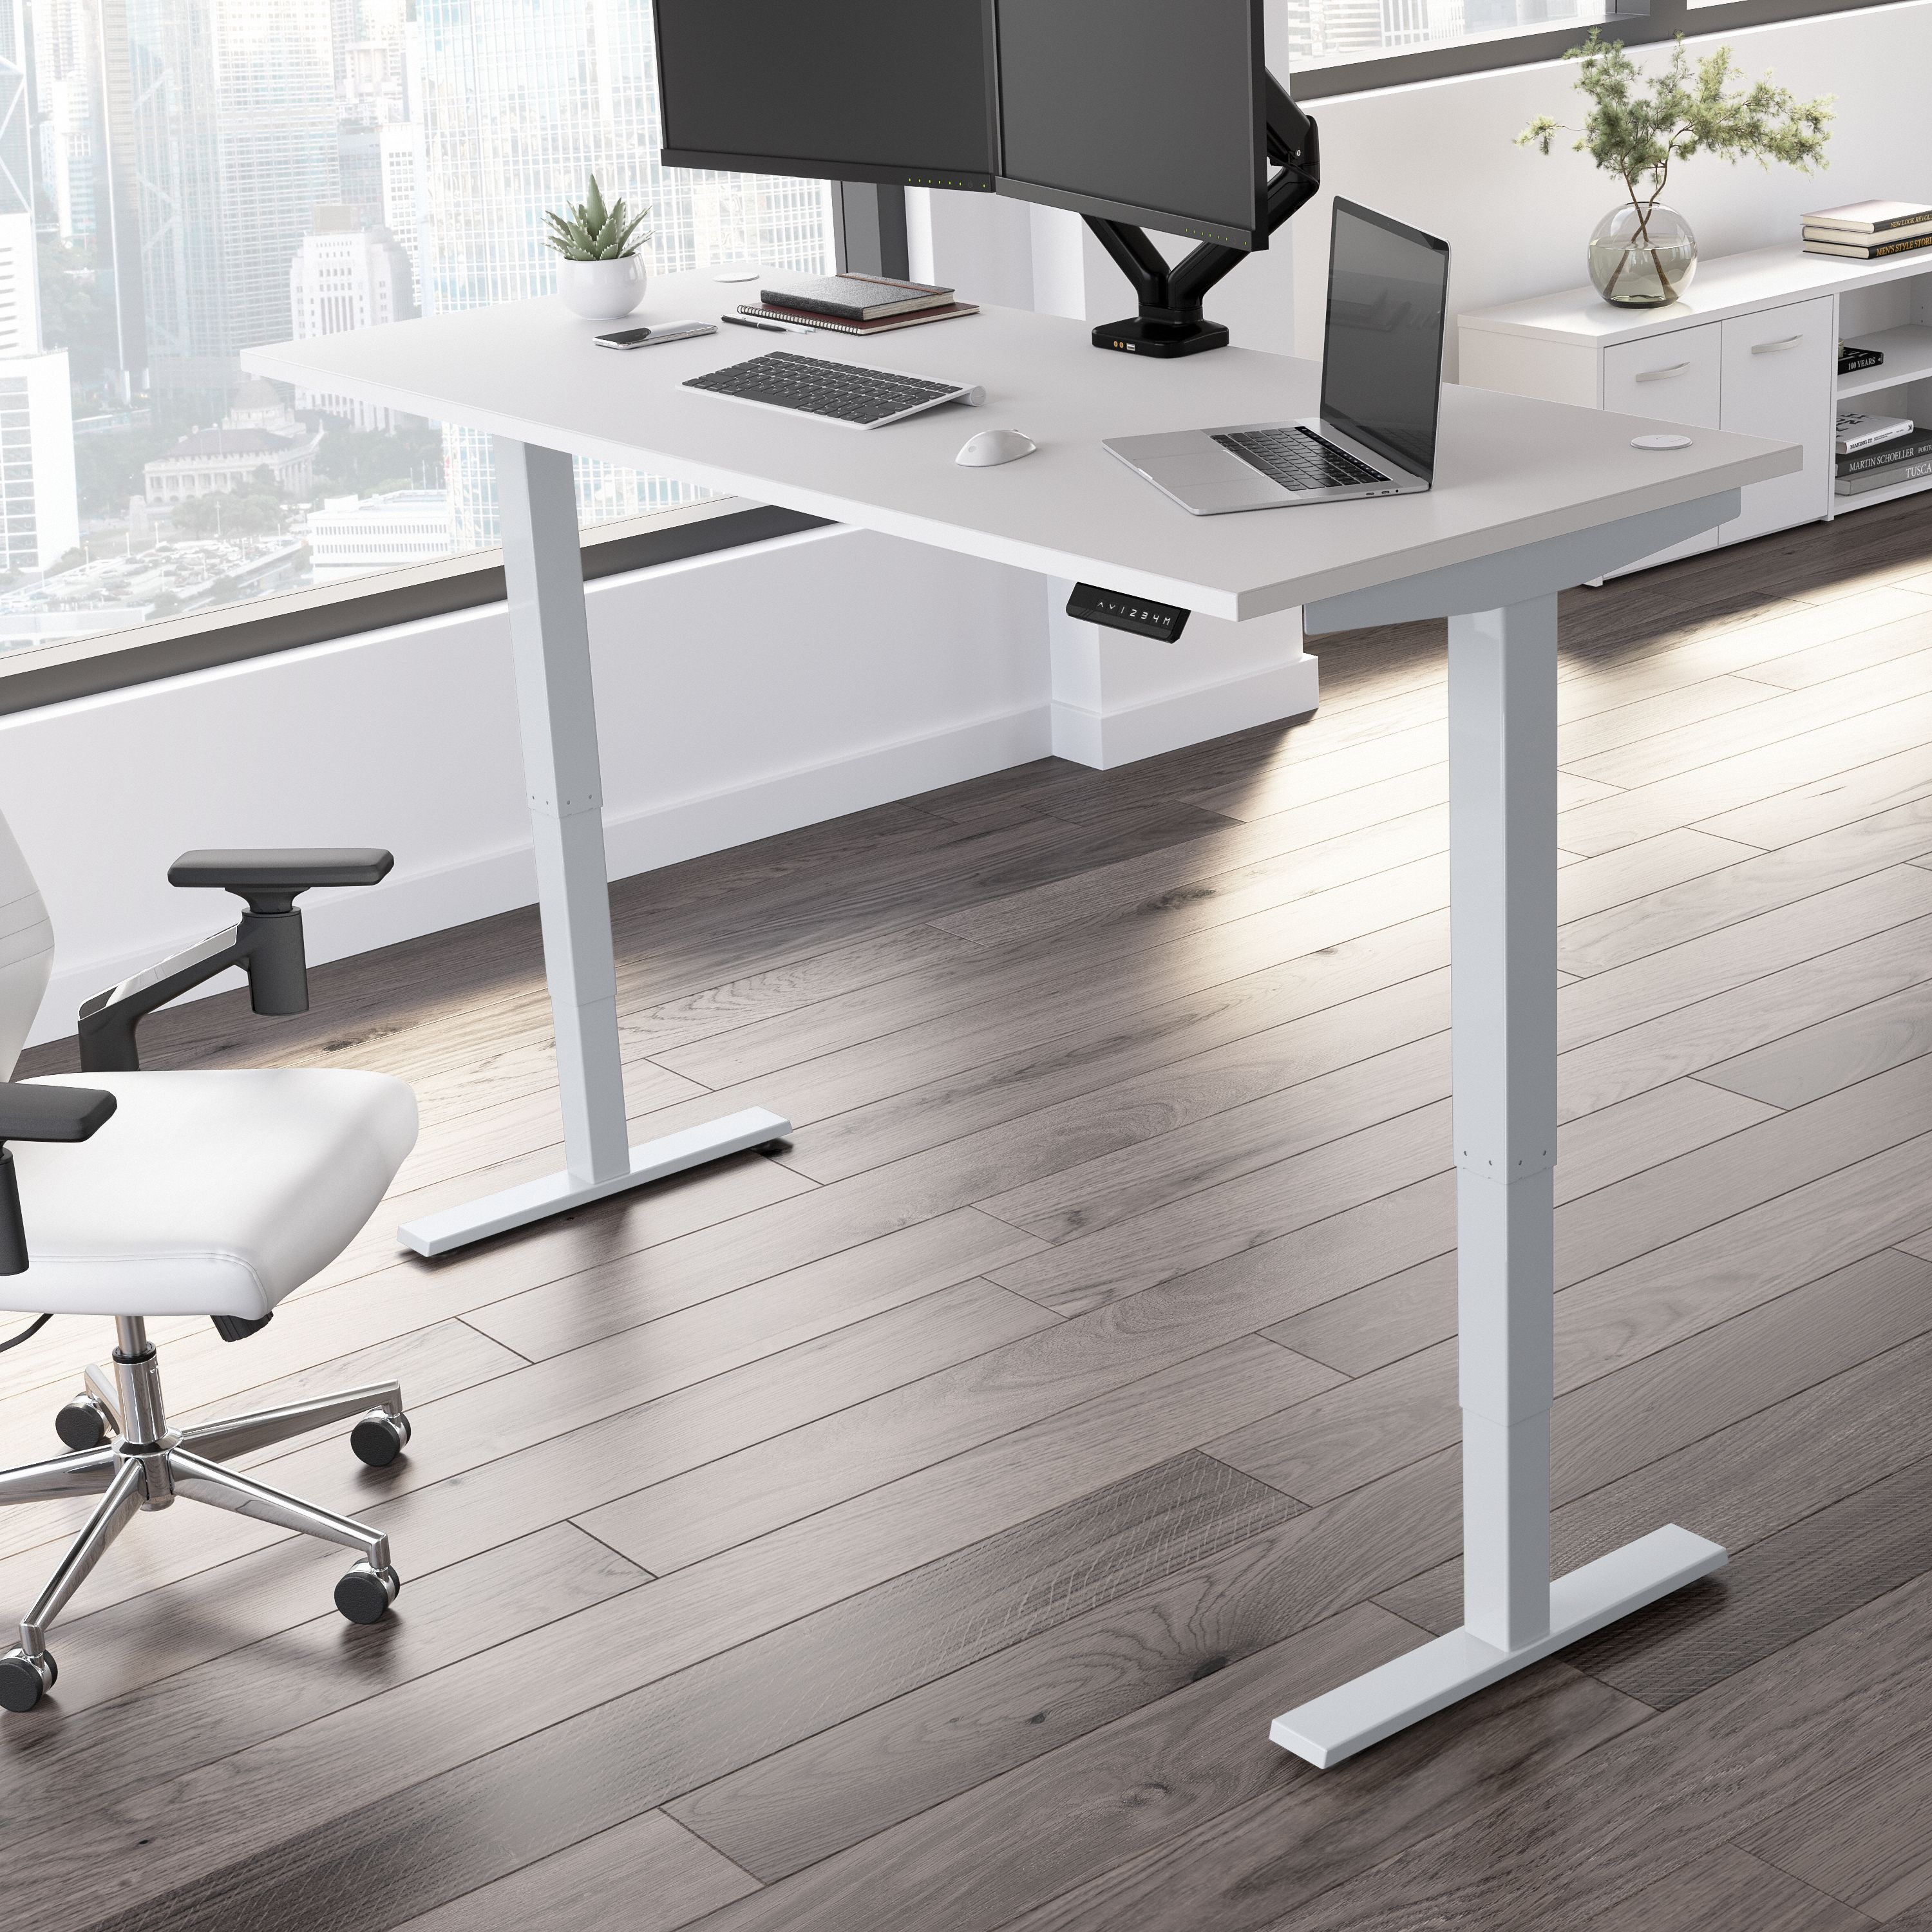 Shop Move 40 Series by Bush Business Furniture 72W x 30D Electric Height Adjustable Standing Desk 01 M4S7230WHSK #color_white/cool gray metallic